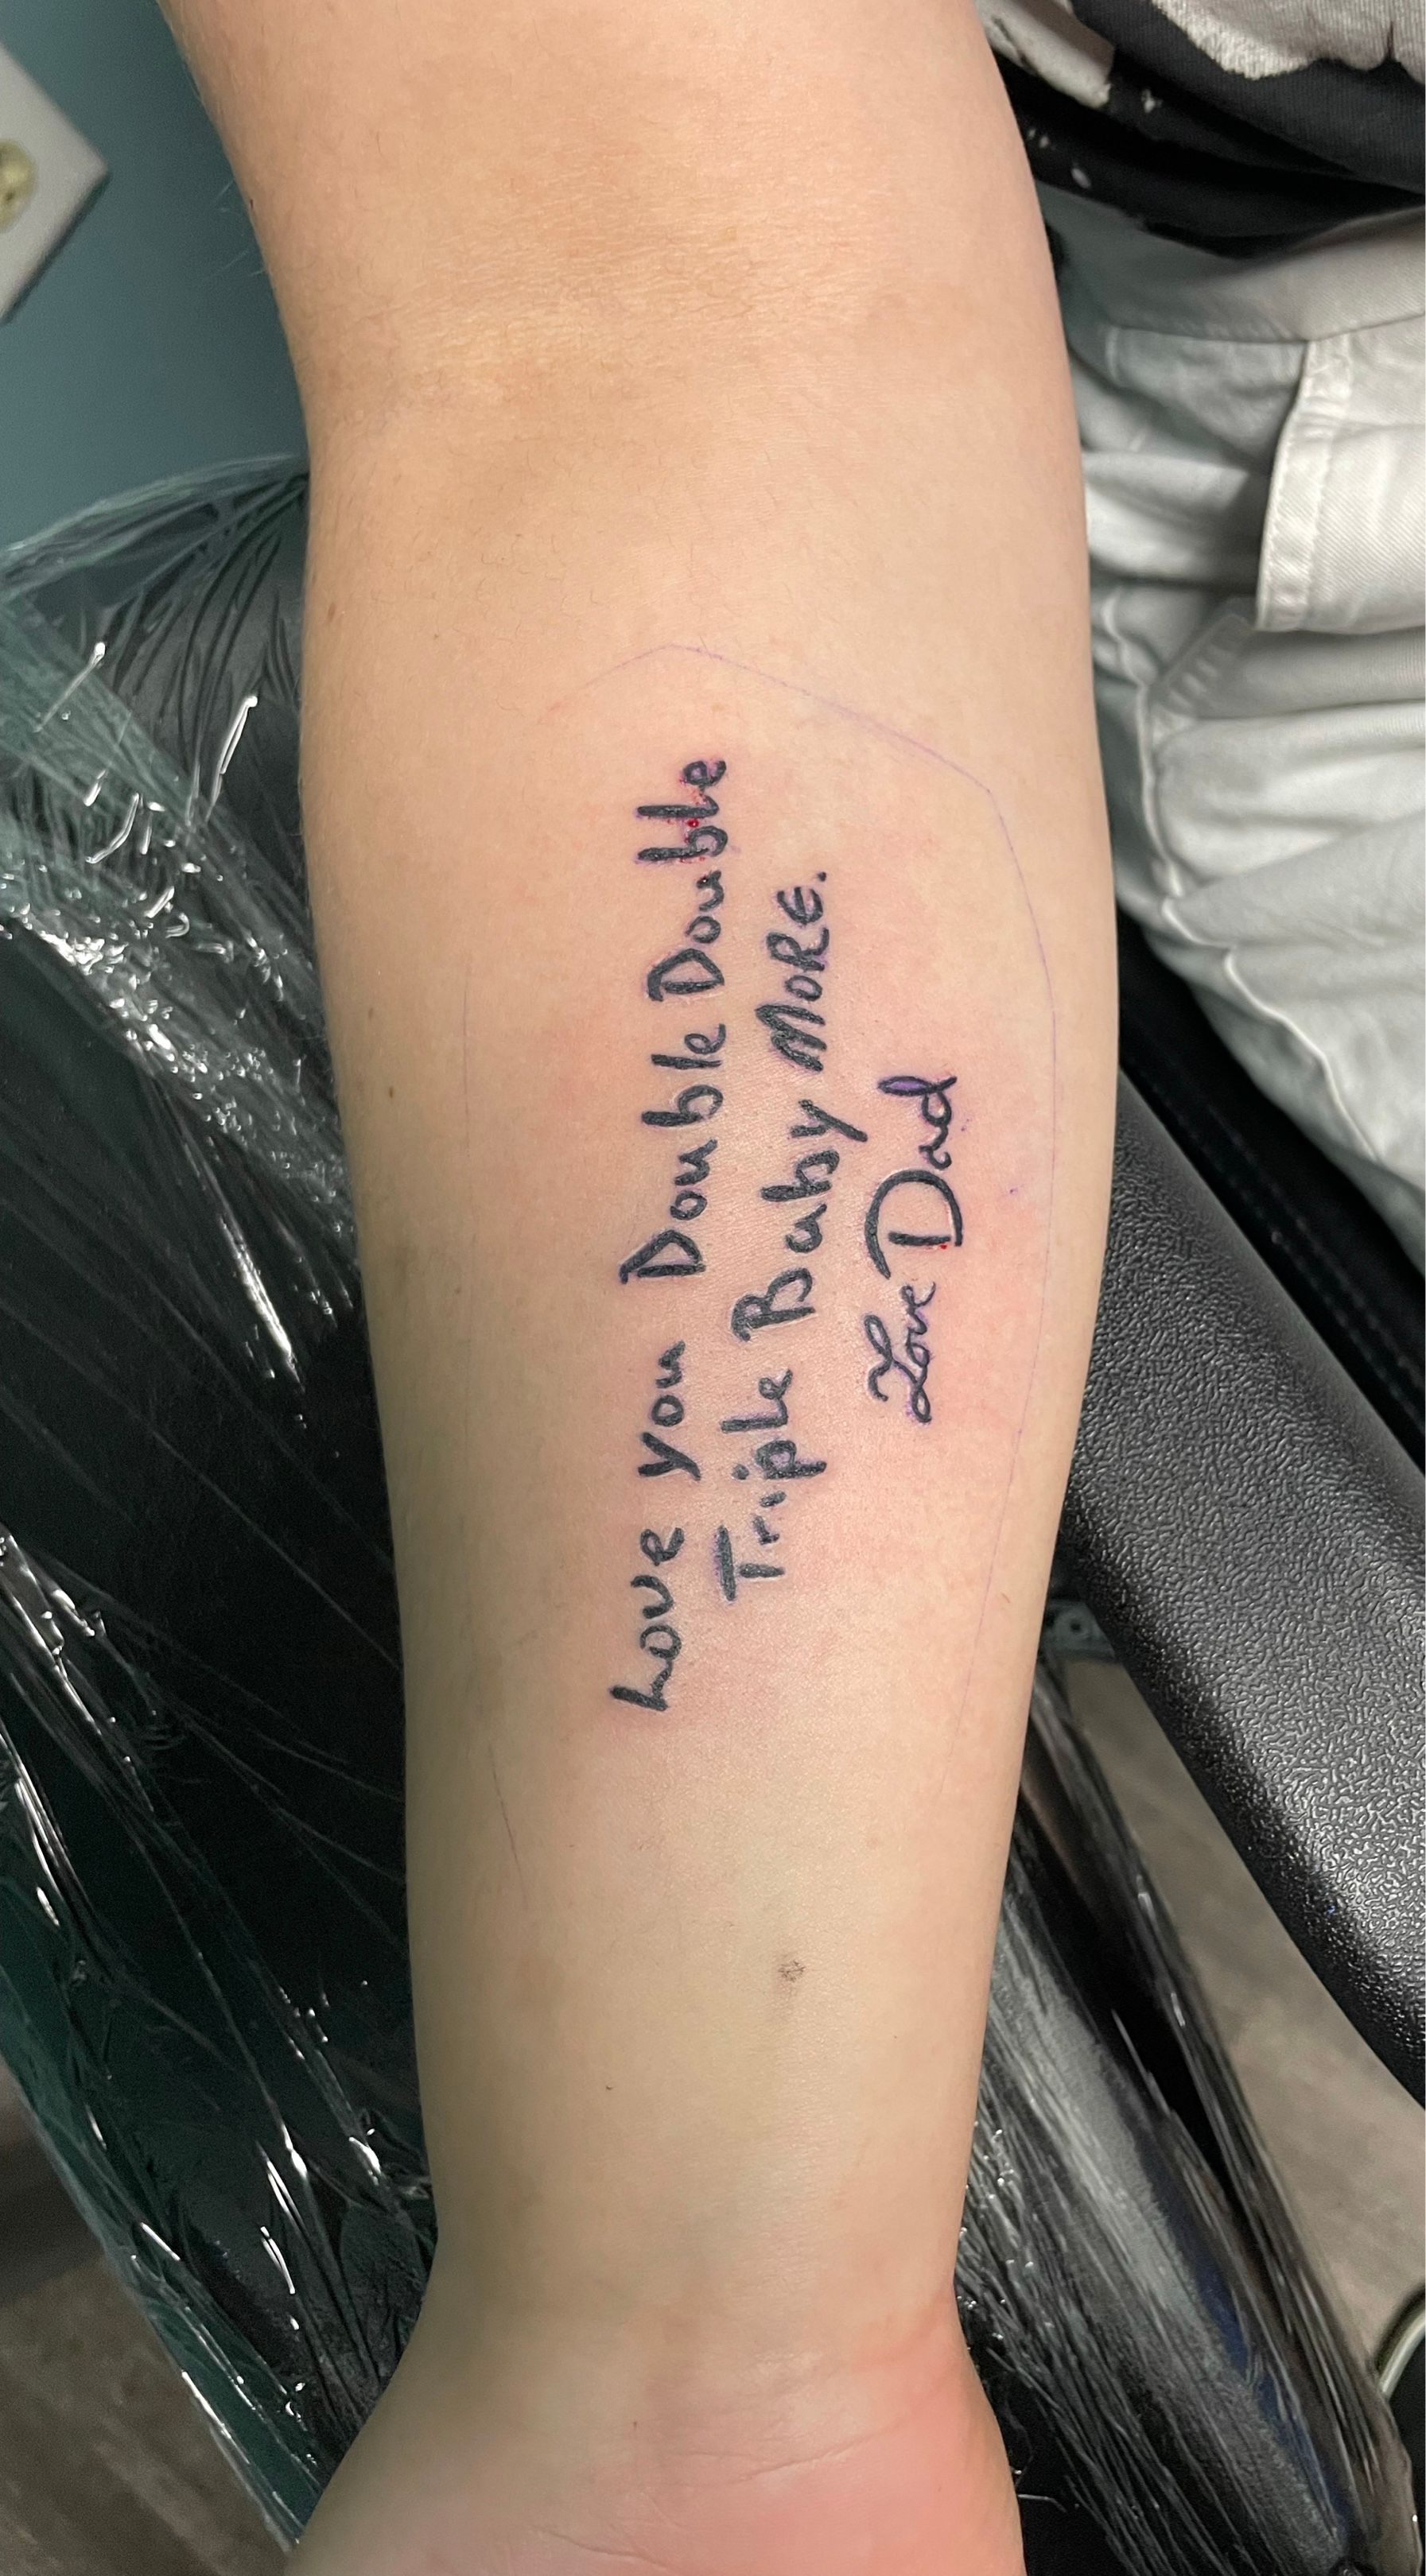 Dan Thomas on Twitter My memorial tattoo for my uncle who took his life 2  years ago The purple amp teal are the colors for suicide prevention  awareness httpstco2jgDkX1EtQ  Twitter